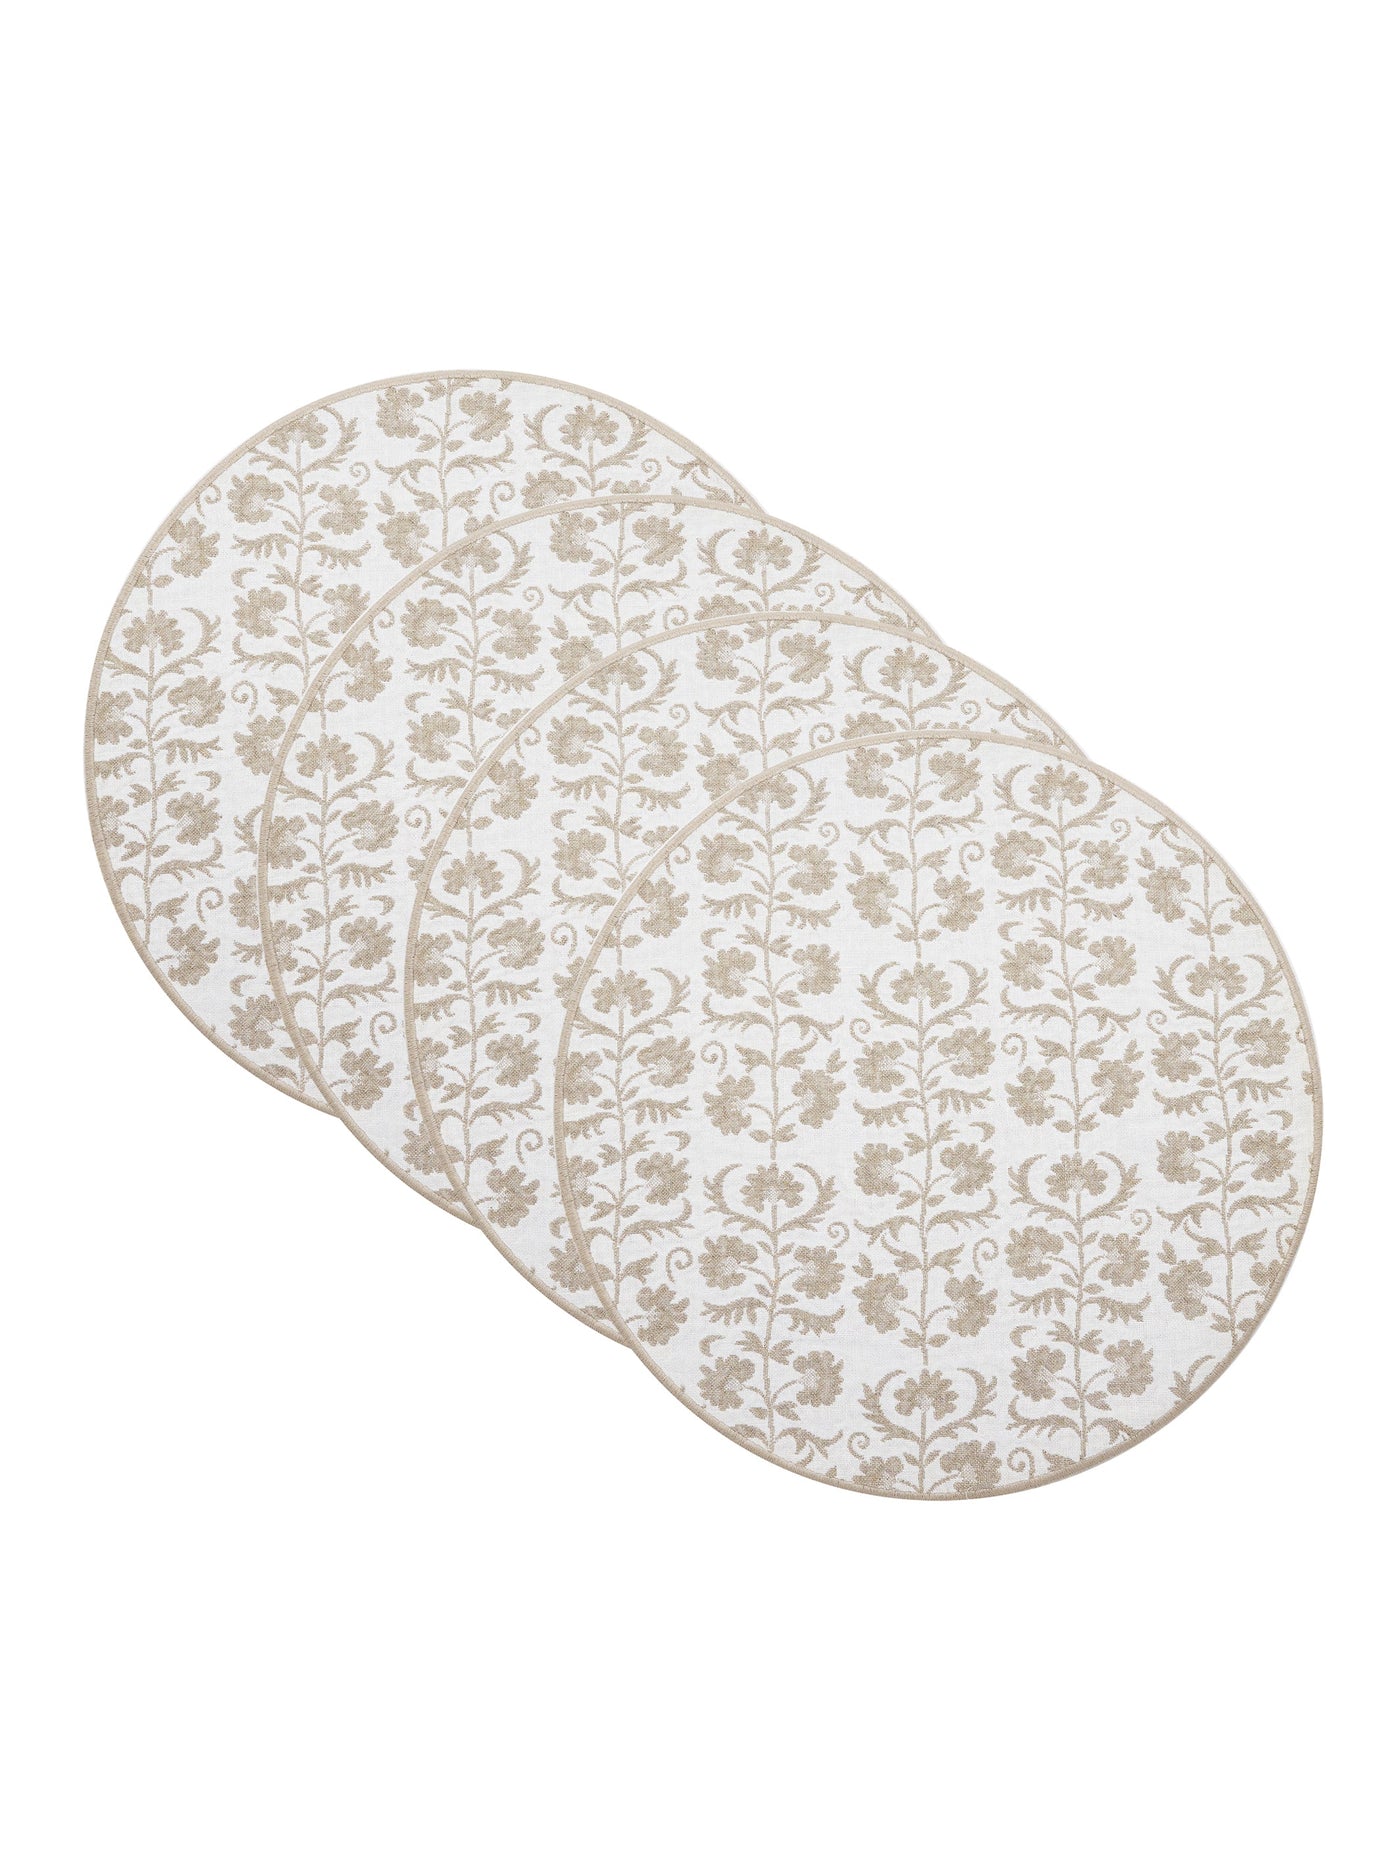 Italian Reversible Suzani Placemat Set in Ecru by Permanent Resident